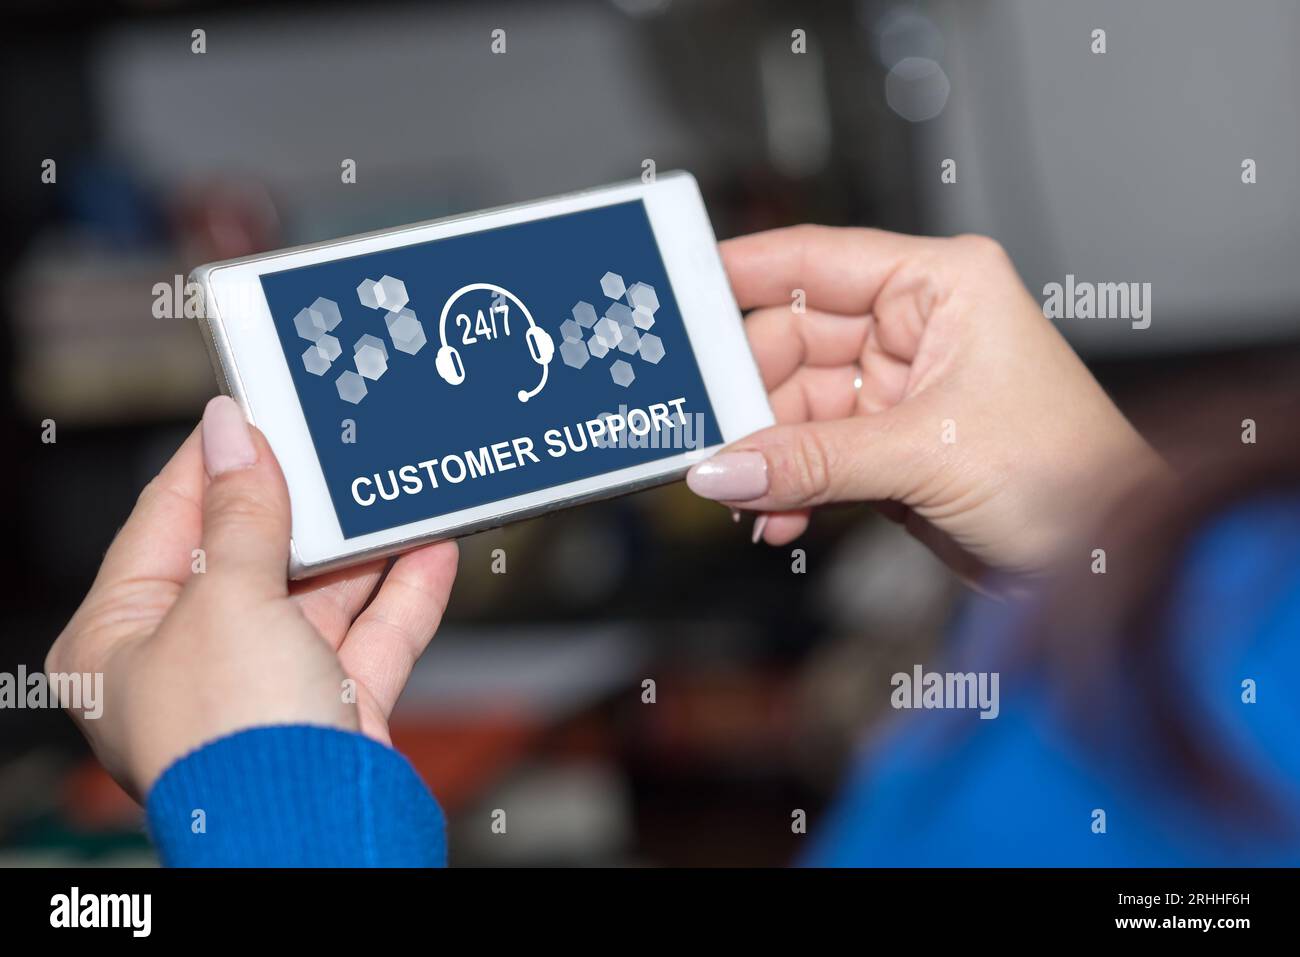 Smartphone screen displaying a customer support concept Stock Photo